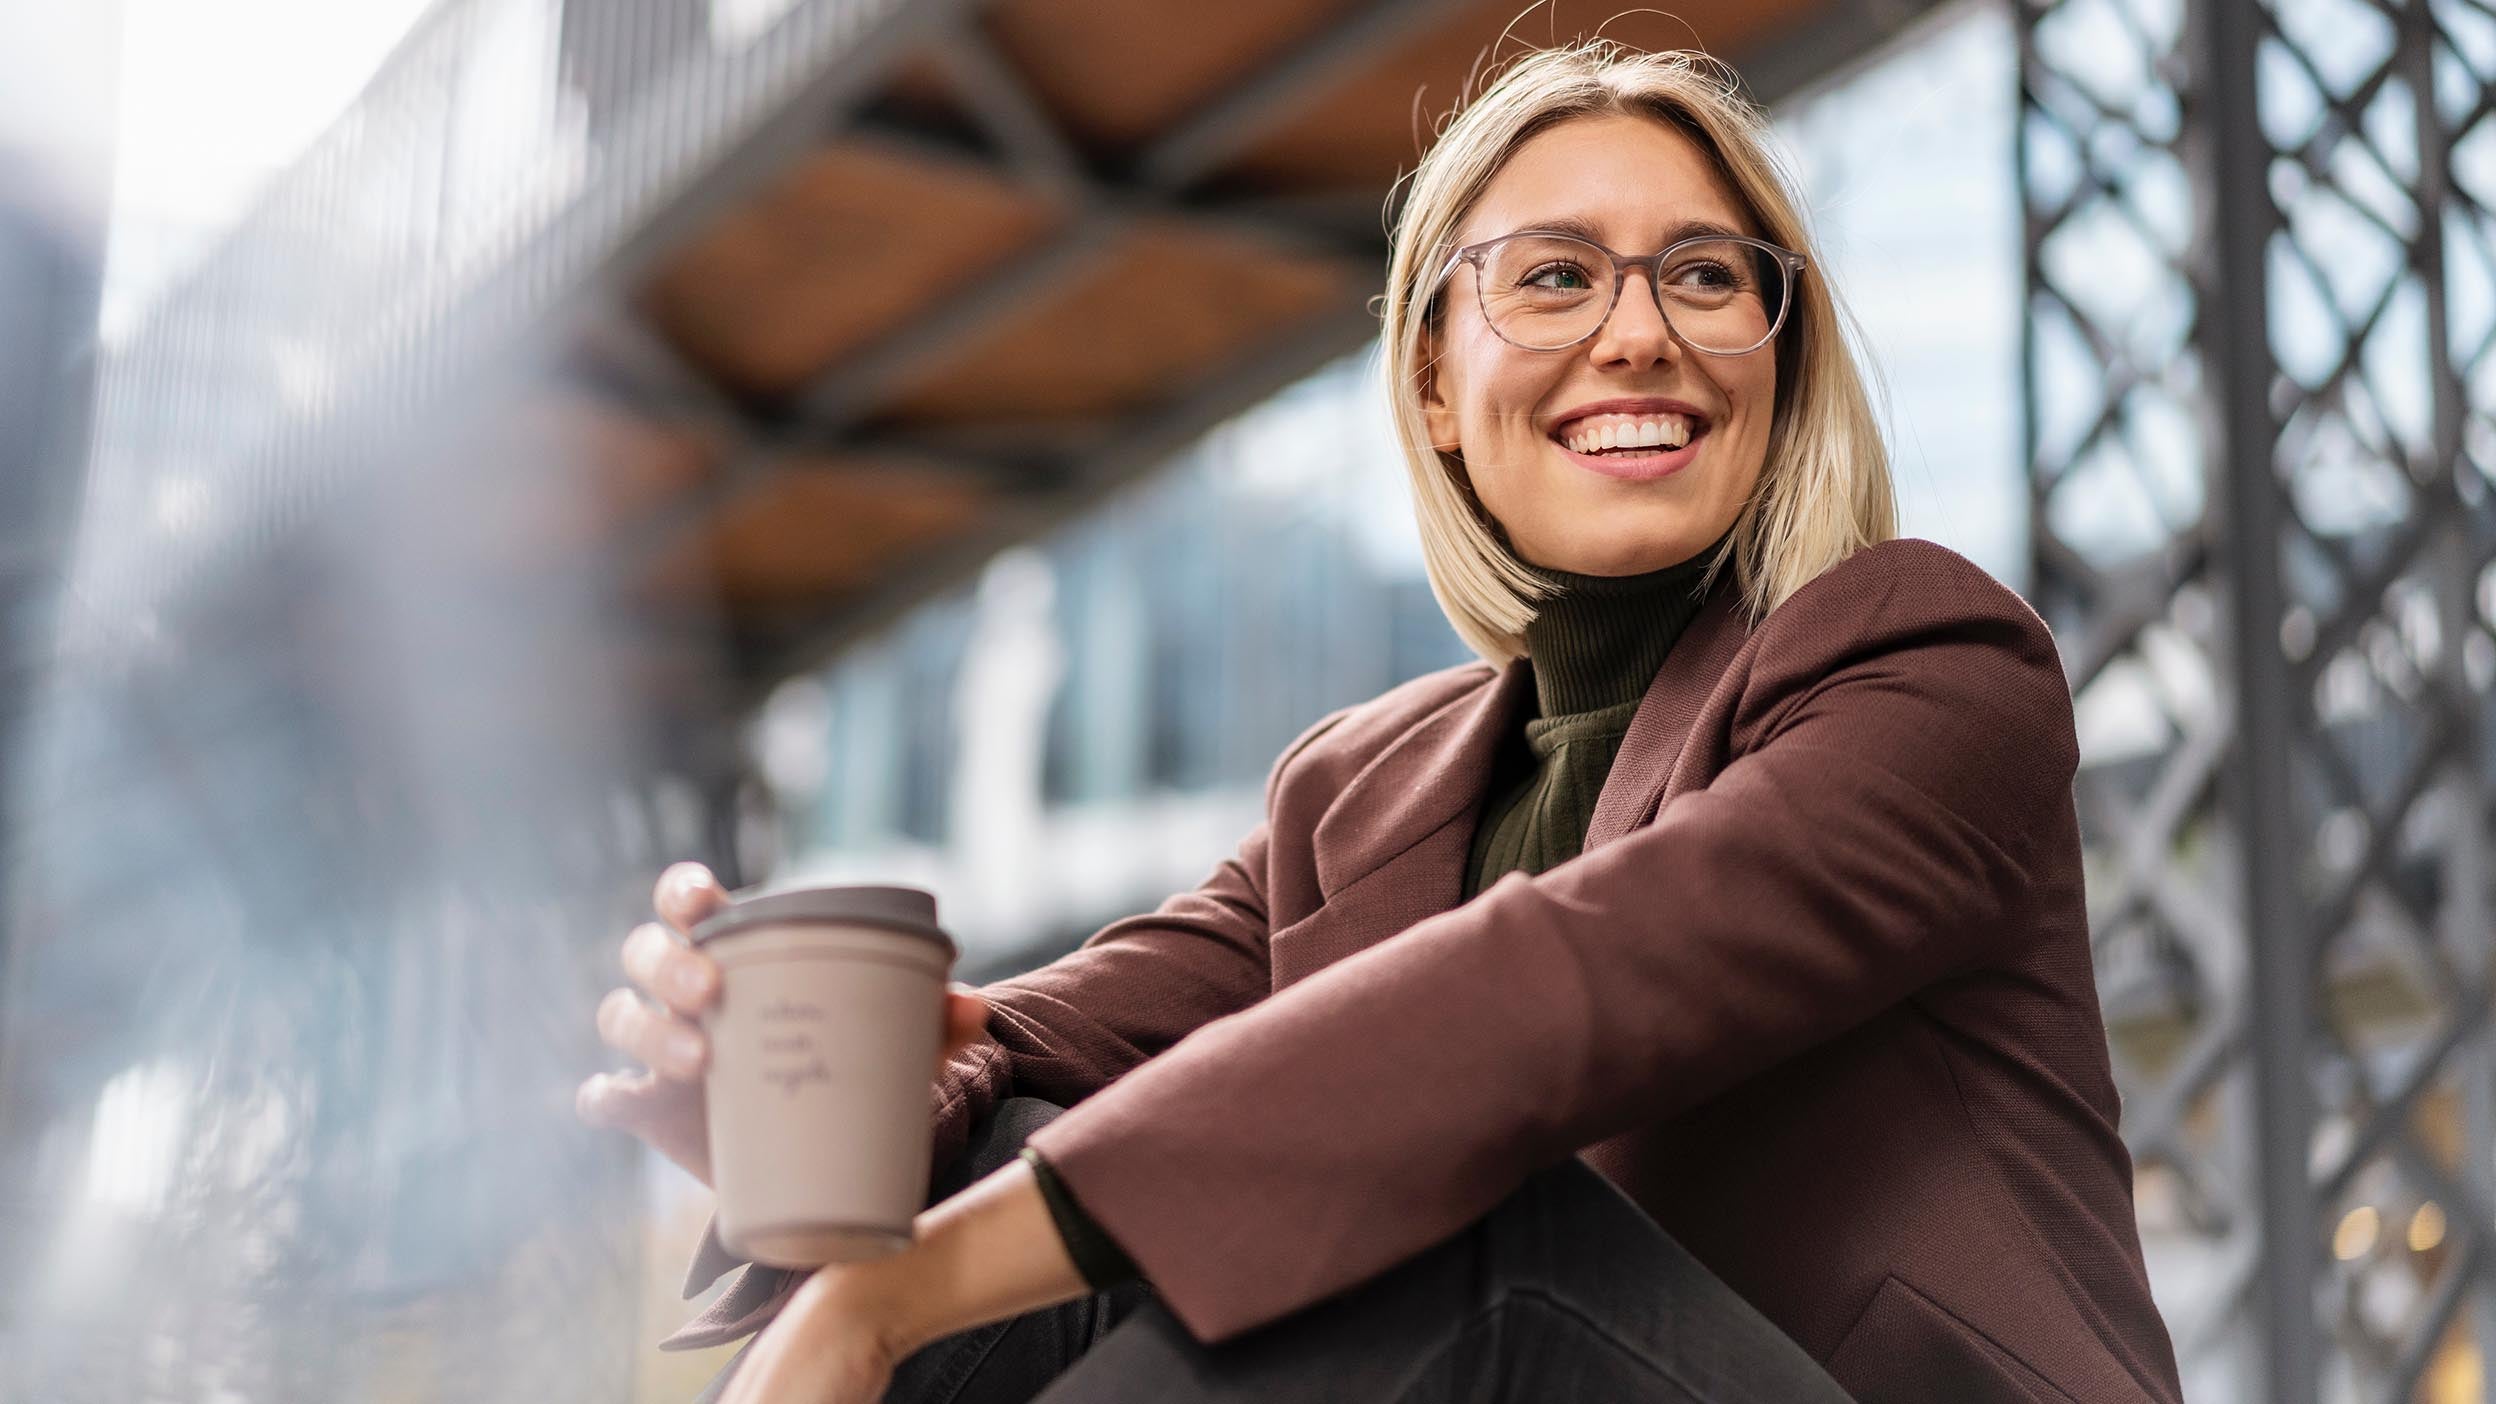 : A young women enjoying a cup of coffee illustrates the way innovation is thriving in unexpected places—including some of the underlying holdings of Invesco QQQ ETF.